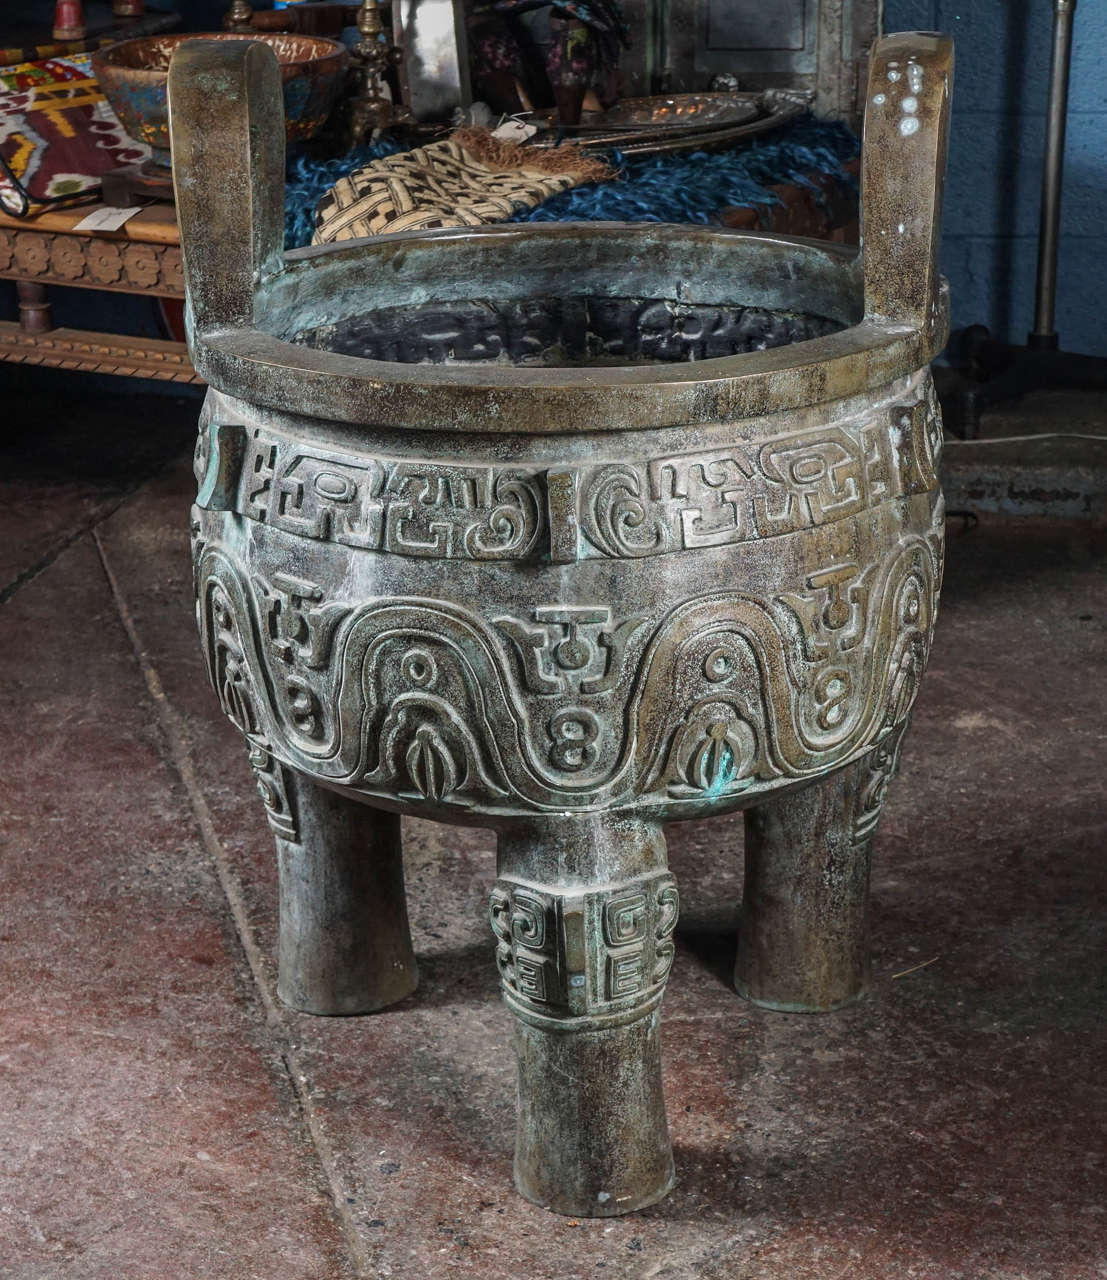 Sculptural Chinese vessel used for cooking, storage and preparation of ritual offerings to ancestors.
Dating back from Xia dynasty to Zhou dynasty, they were associated with power and dominion over land.